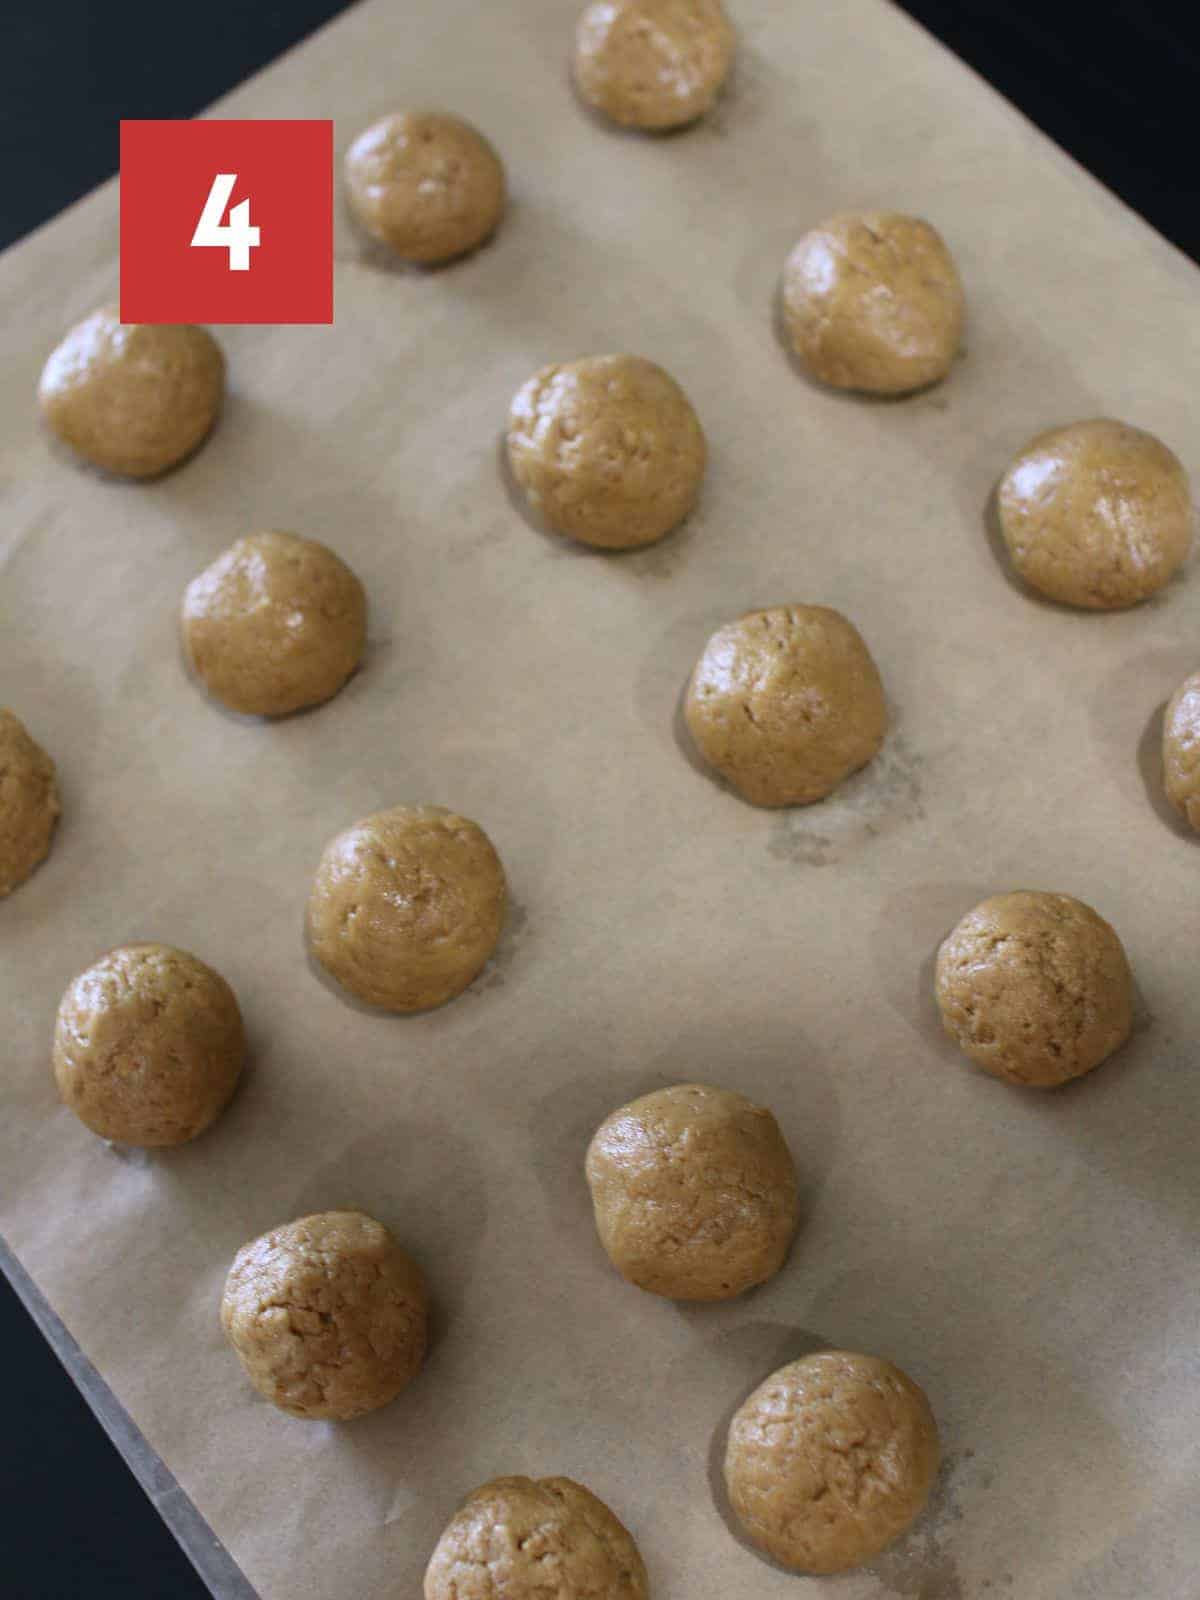 Rolled gingerbread truffles on a brown parchment lined baking sheet that sits on a black table.  In the upper left corner is a dark red square and a white '4' in the center.